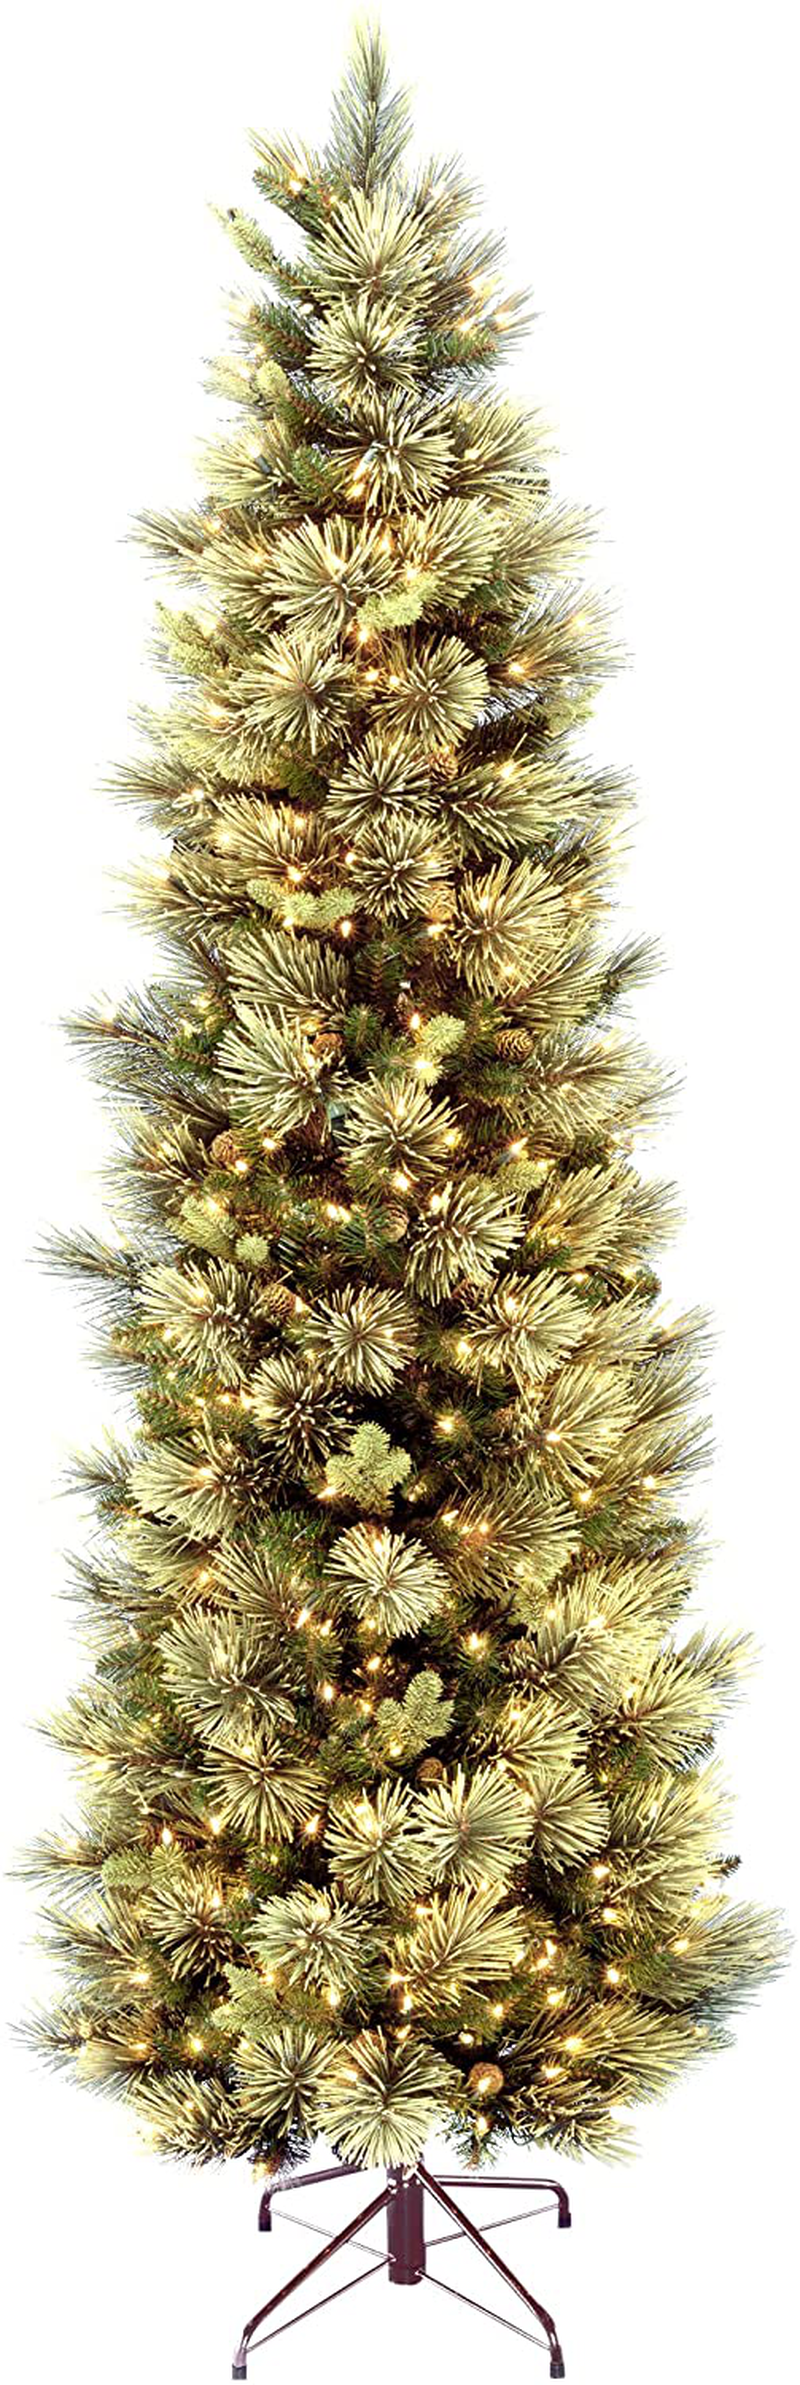 National Tree Company Pre-lit Artificial Christmas Tree | Includes Pre-strung White Lights and Stand | Carolina Pine Slim - 7.5 ft